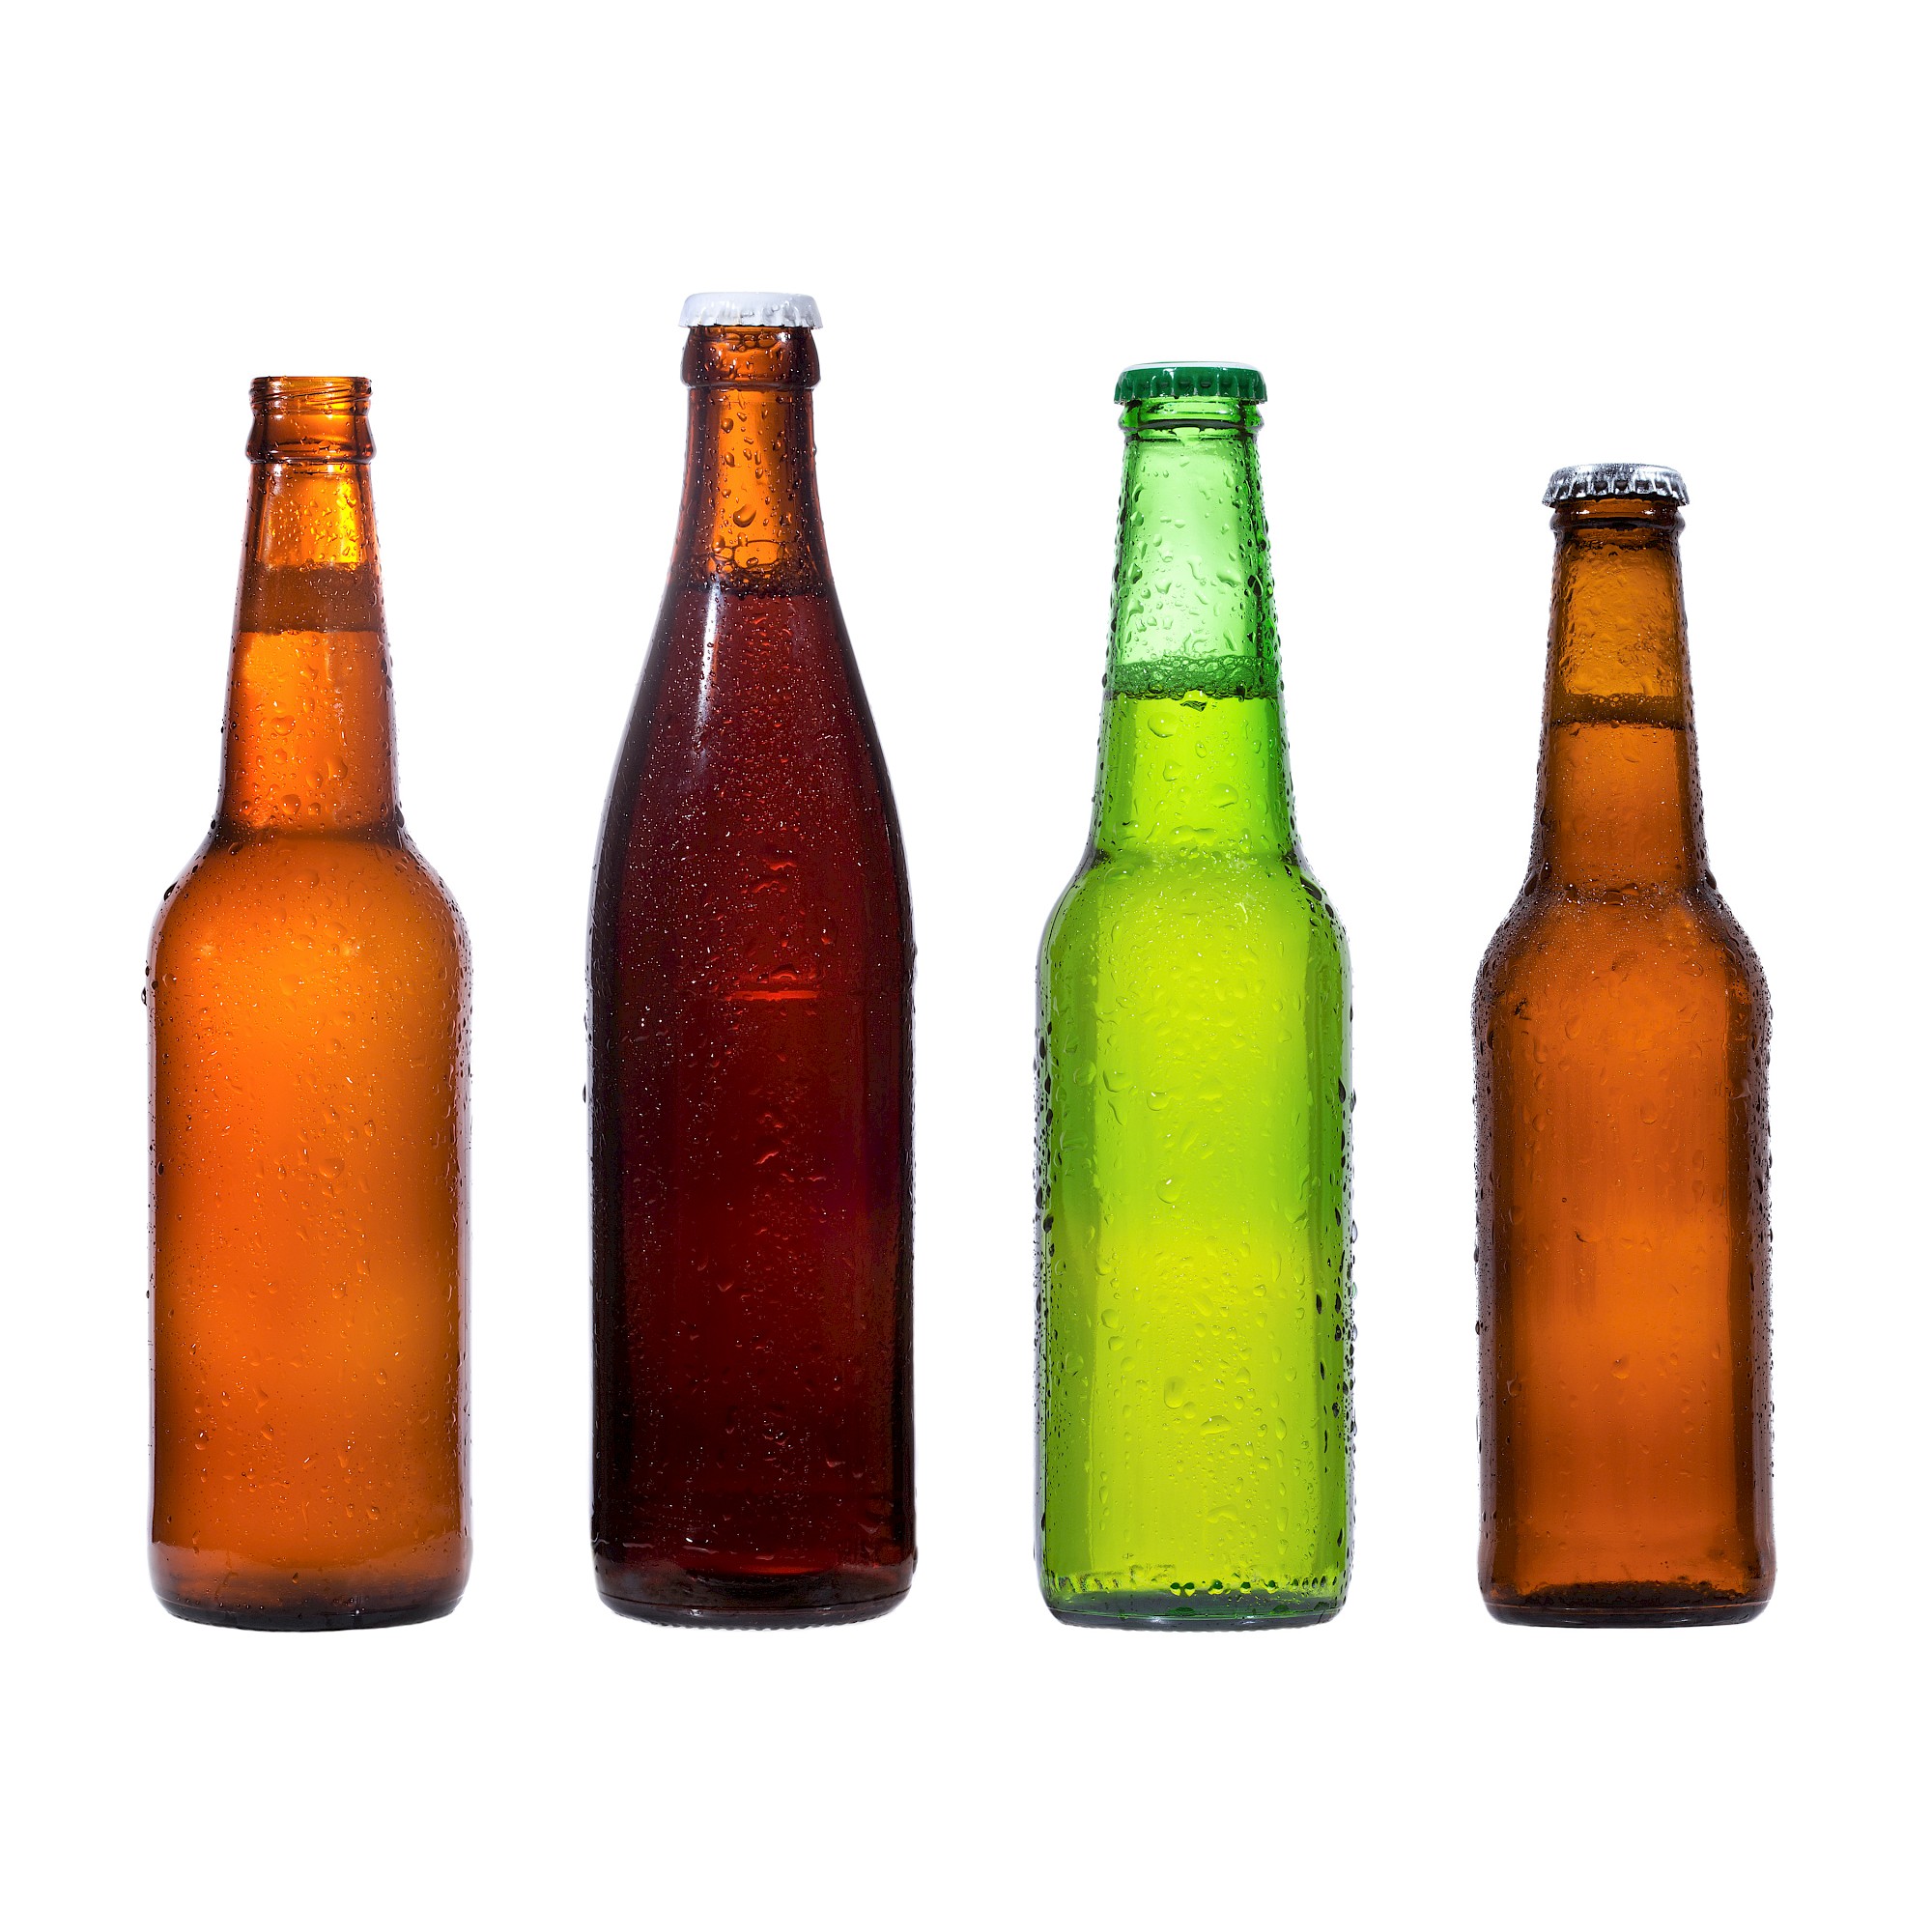 Bottle rightweighting - beer, cider and spirits